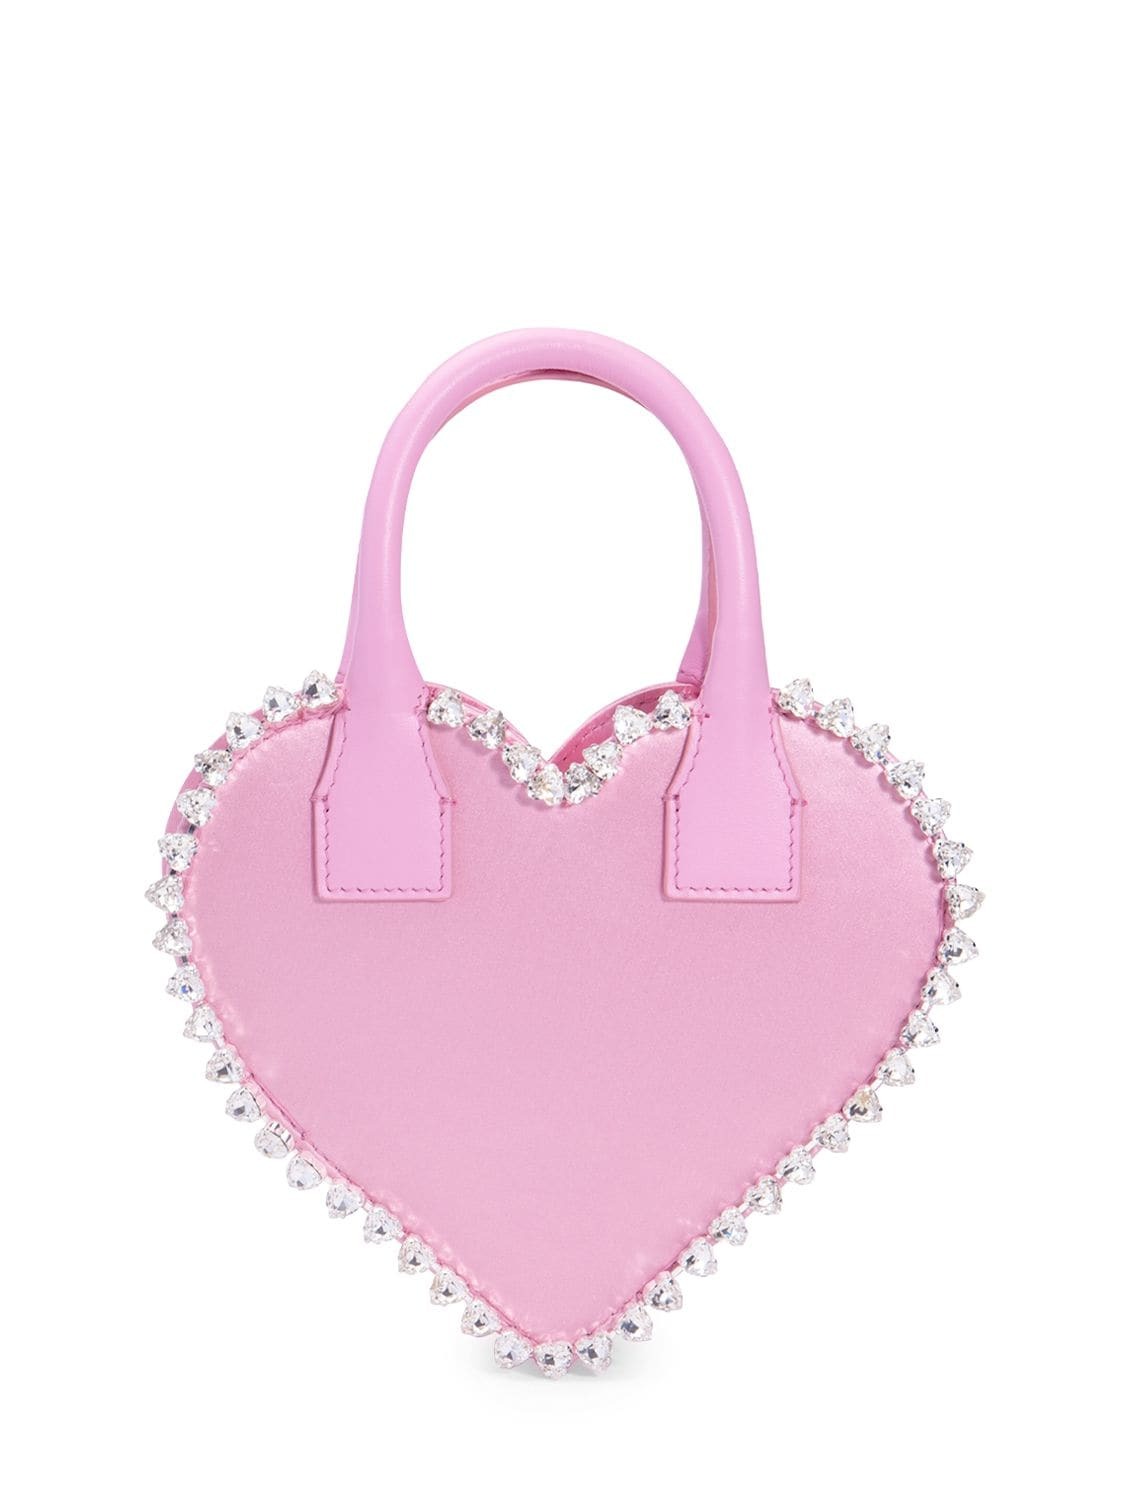 MACH & MACH Small Audrey Heart Satin Top Handle Bag in pink